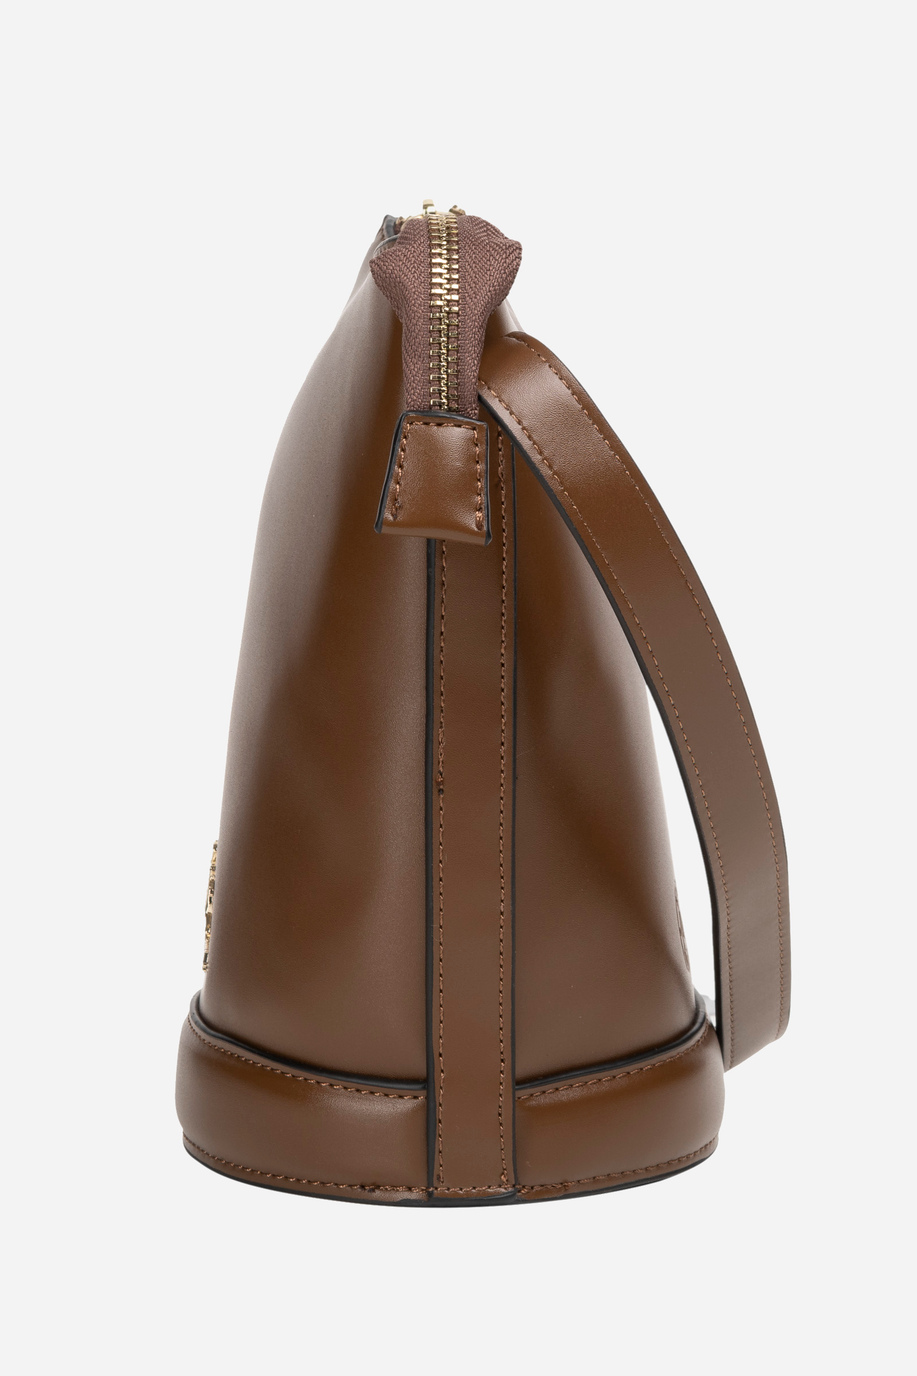 Solid brown shoulder bag in pu fabric - Heritage - Accessories for her | La Martina - Official Online Shop